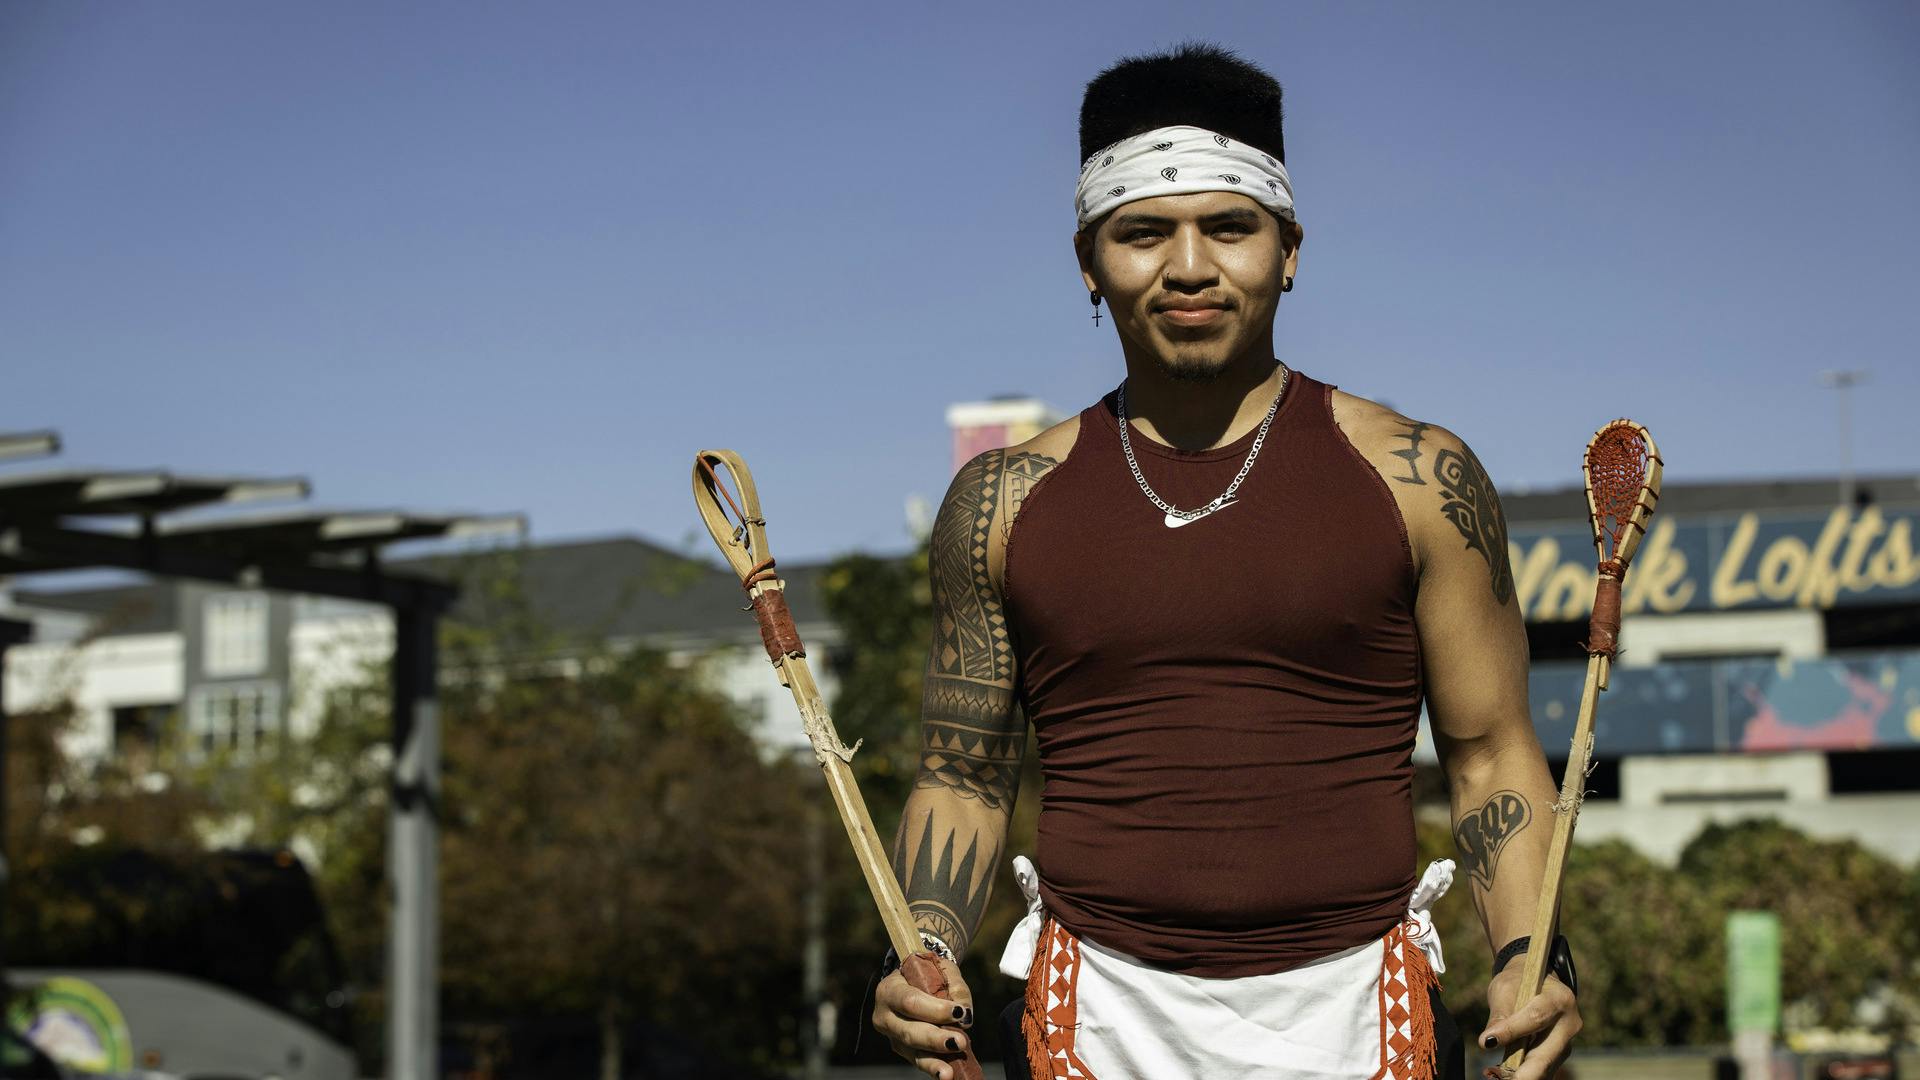 A person stands, holding a Stickball stick in each hand, looking at the camera.